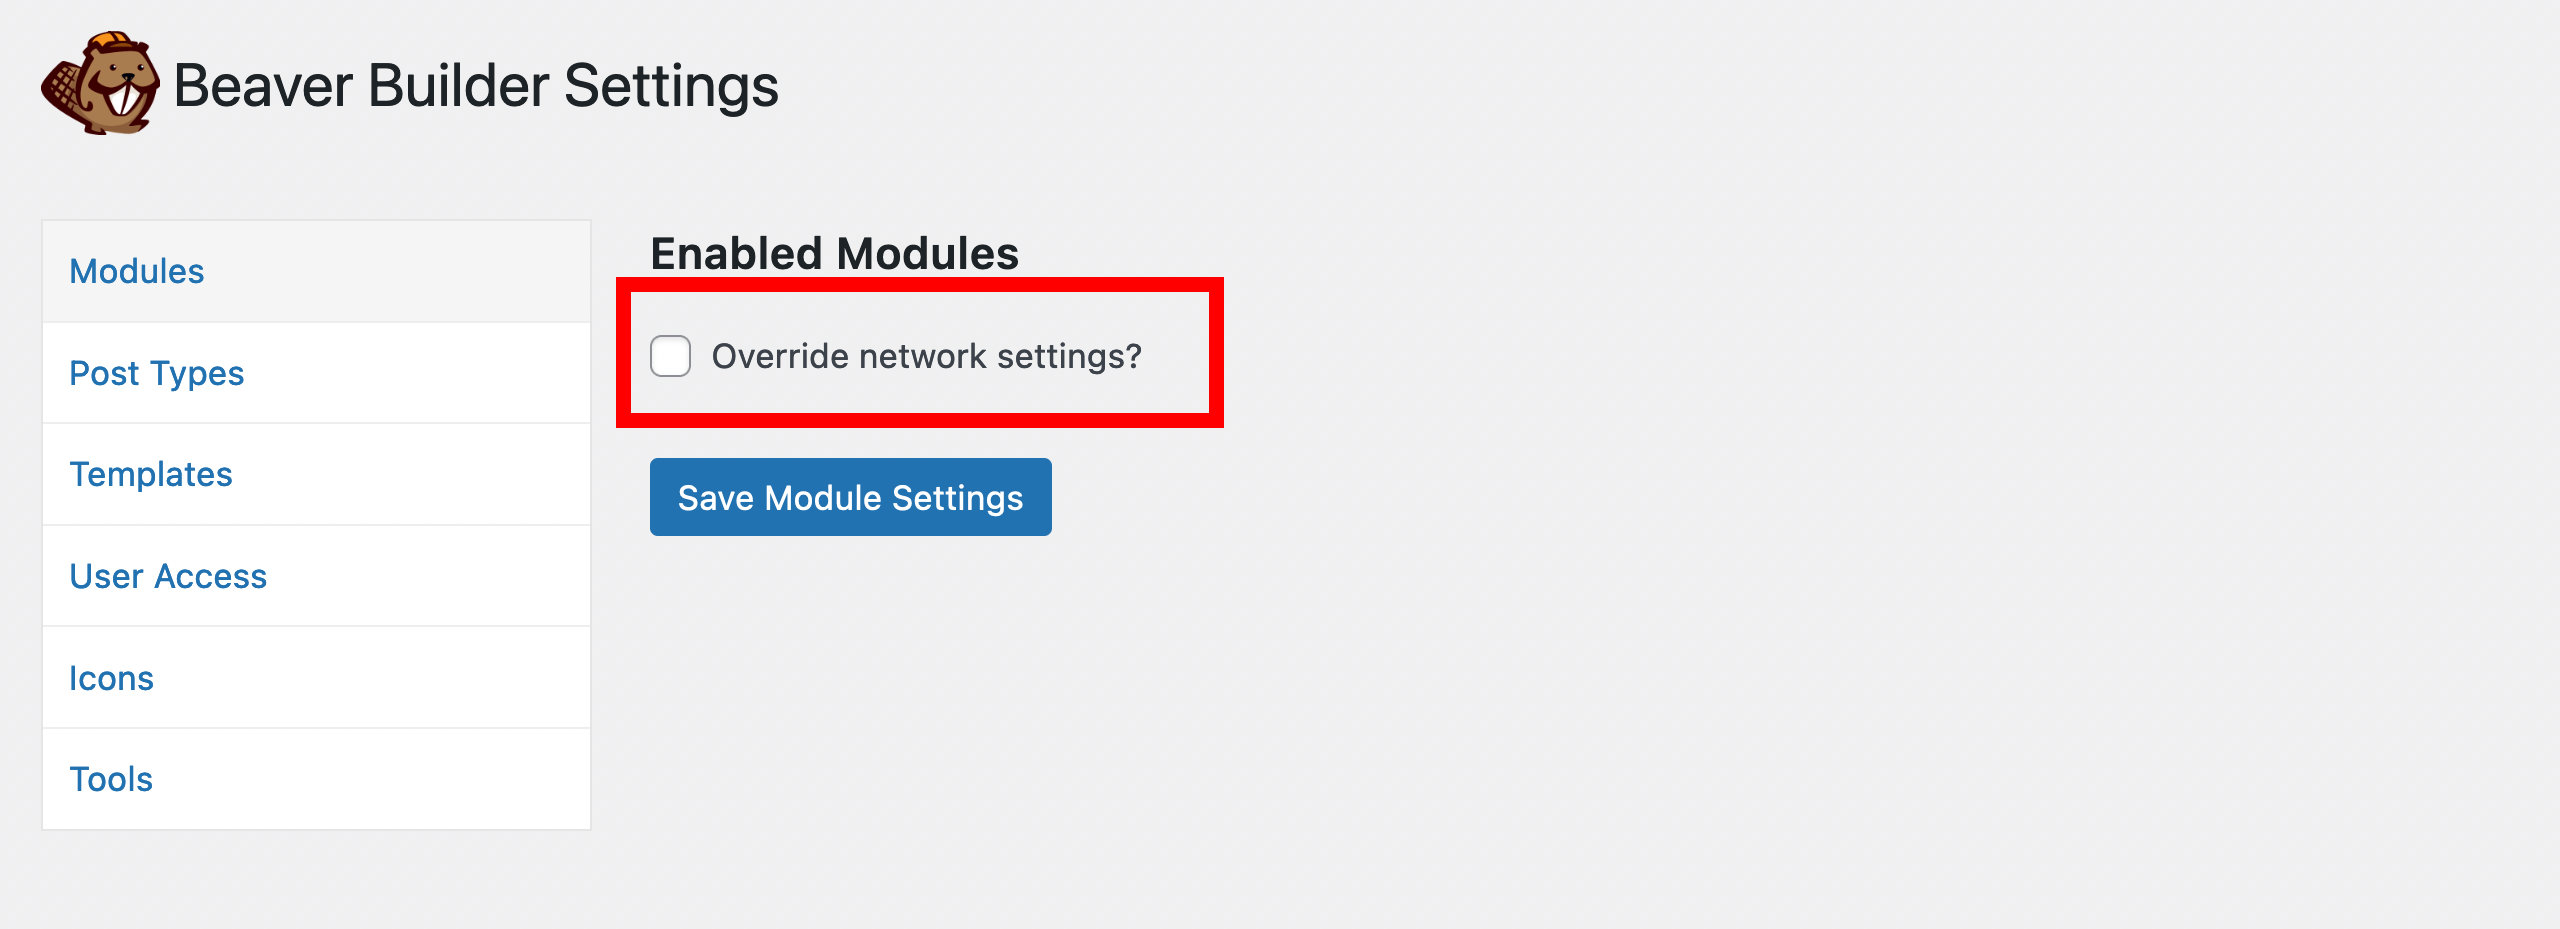 Override network settings on a site-by-site basis